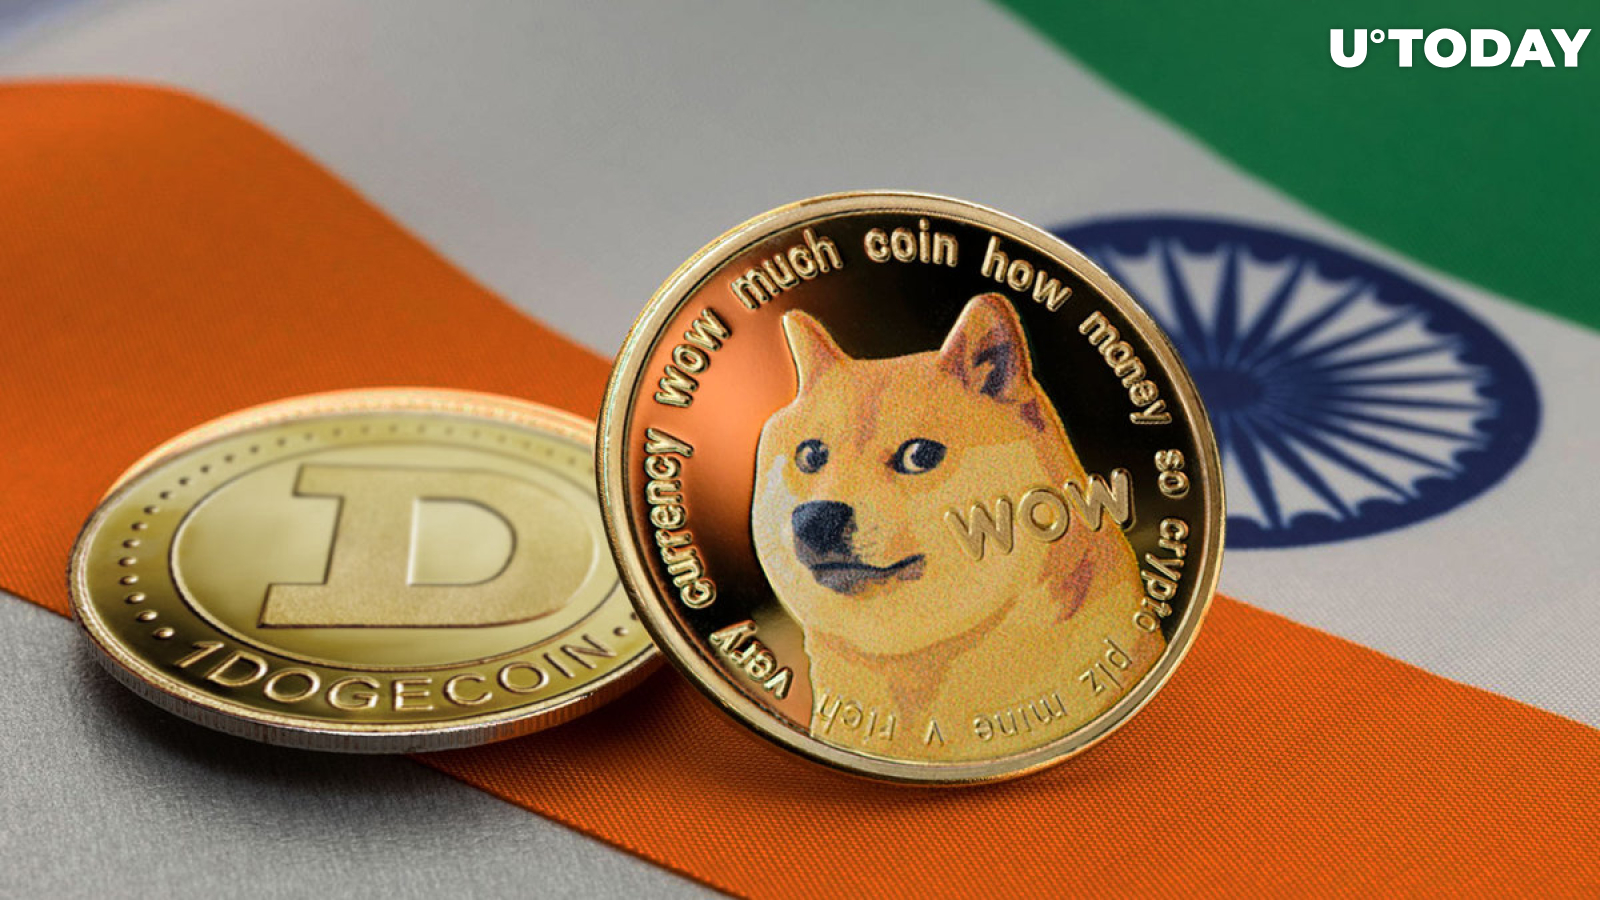 Live Dogecoin Price – How Does it Compare to Other Cryptocurrencies? - bitcoinhelp.fun